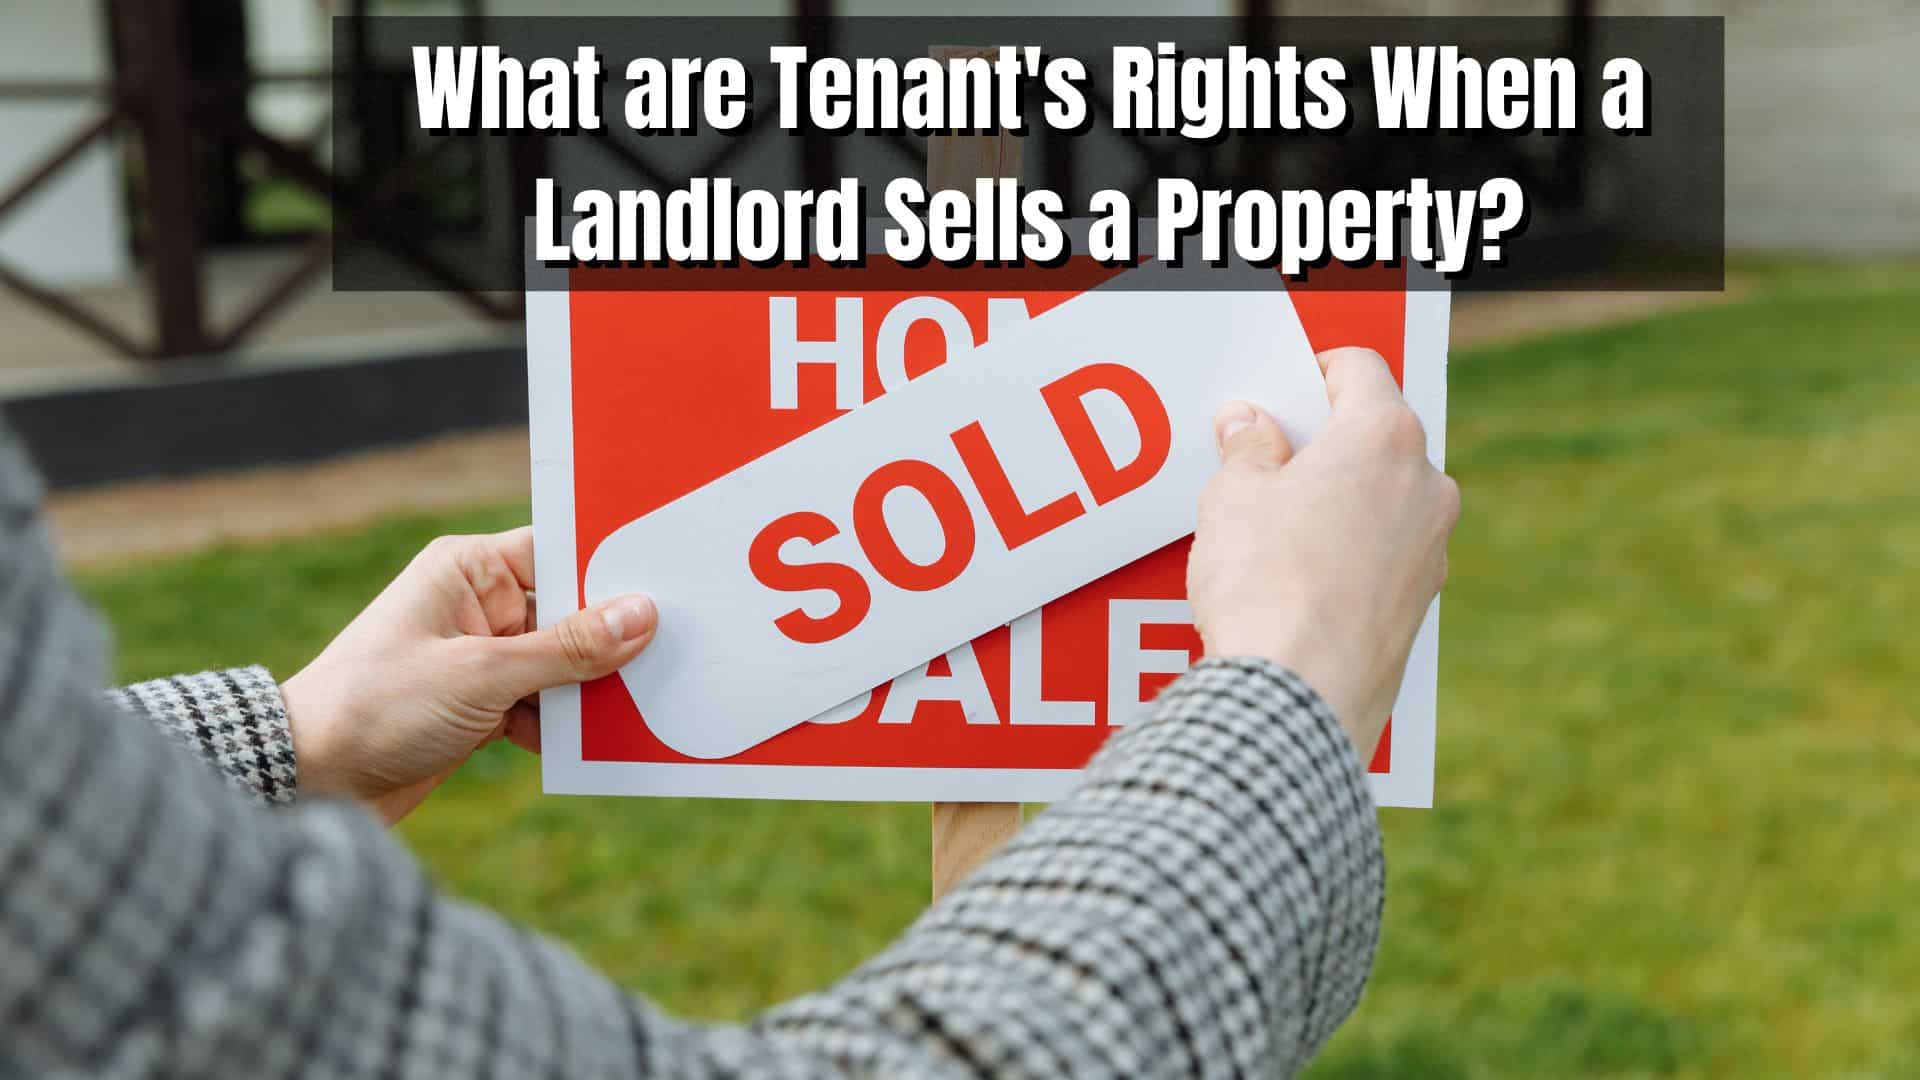 When a landlord sells their property, the tenants have certain rights that must be upheld. Here's a guide to what tenants can expect.